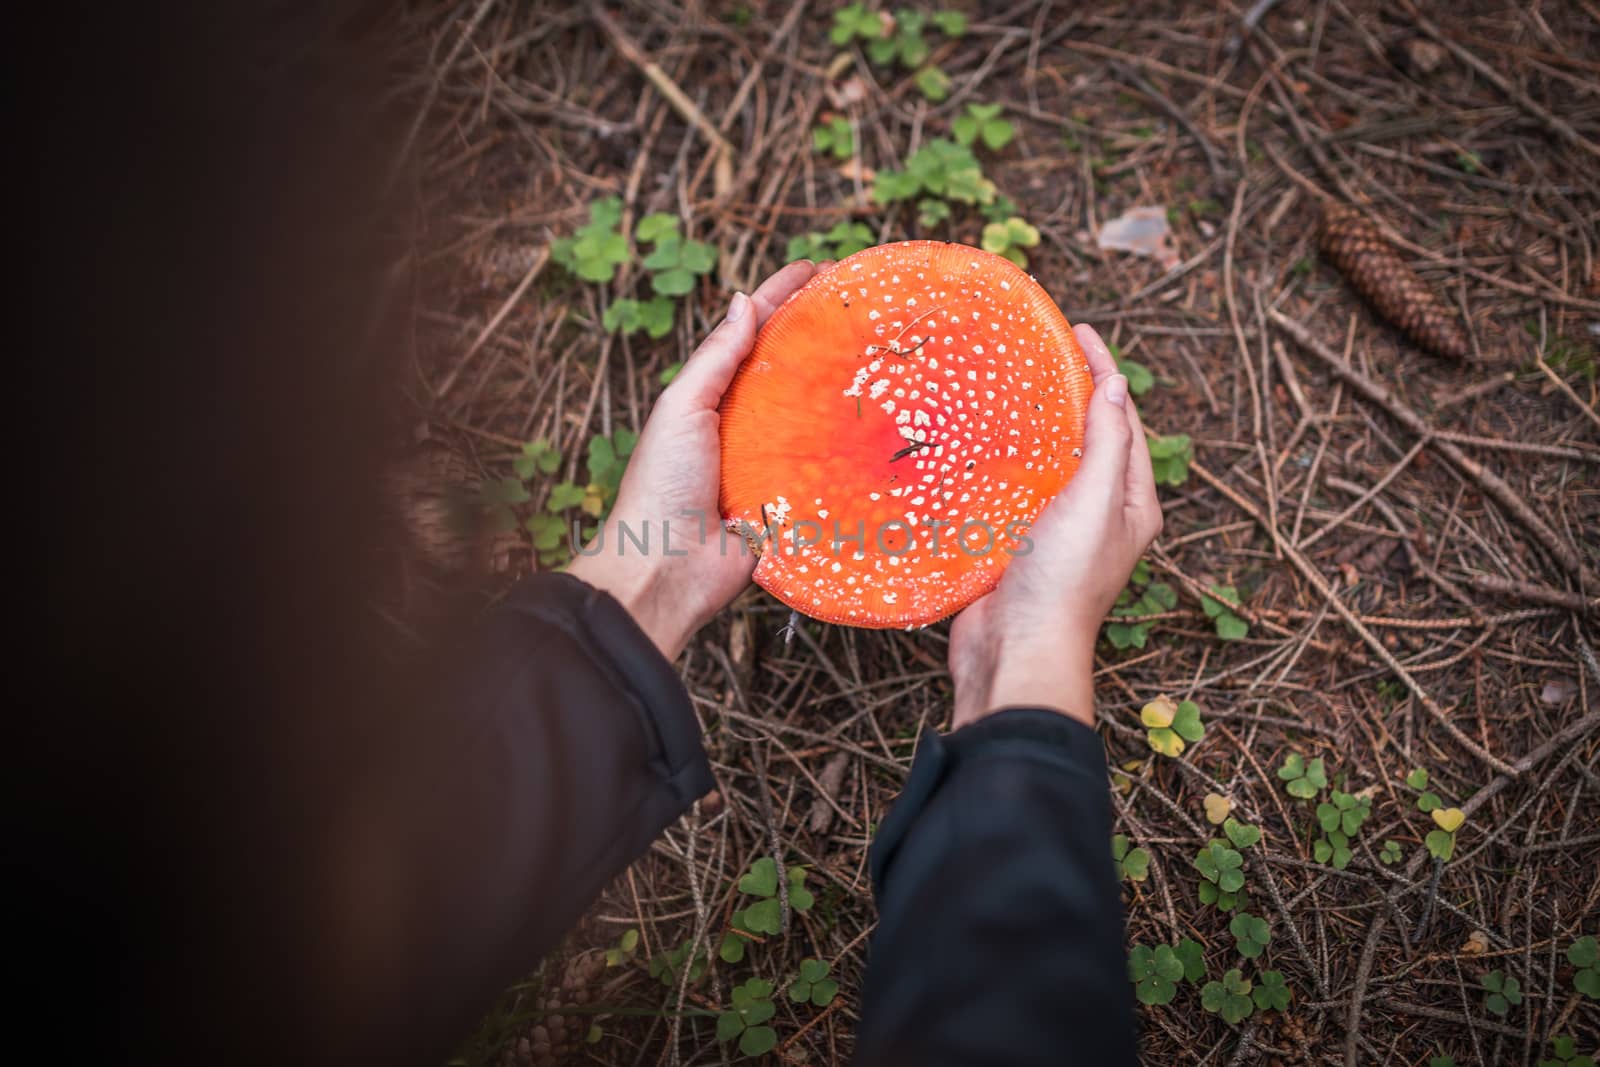 Huge red amanita in the forest. Big as hand. Poisonous mushroom, do not eat. by petrsvoboda91